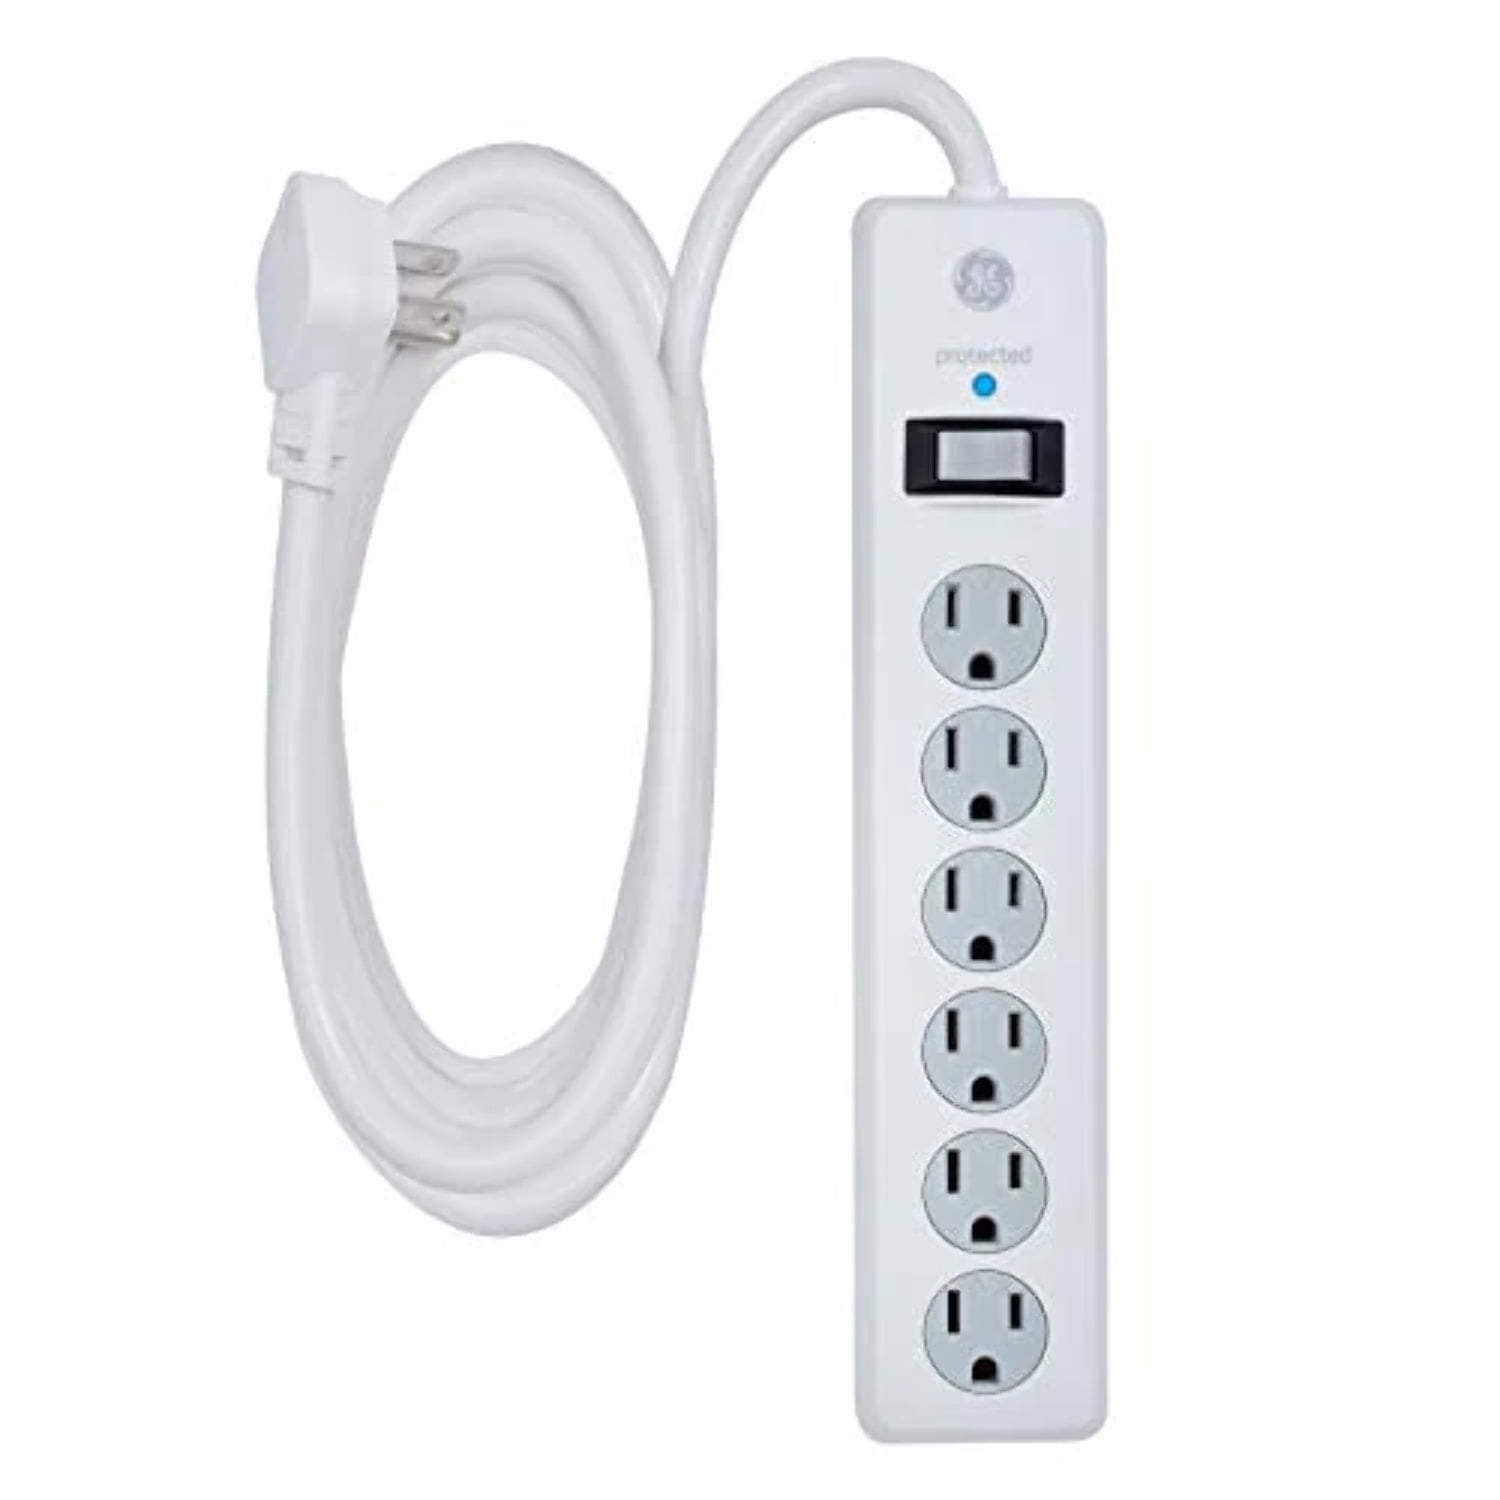 My favorite HomeKit power strip is a great gift for 30% off today